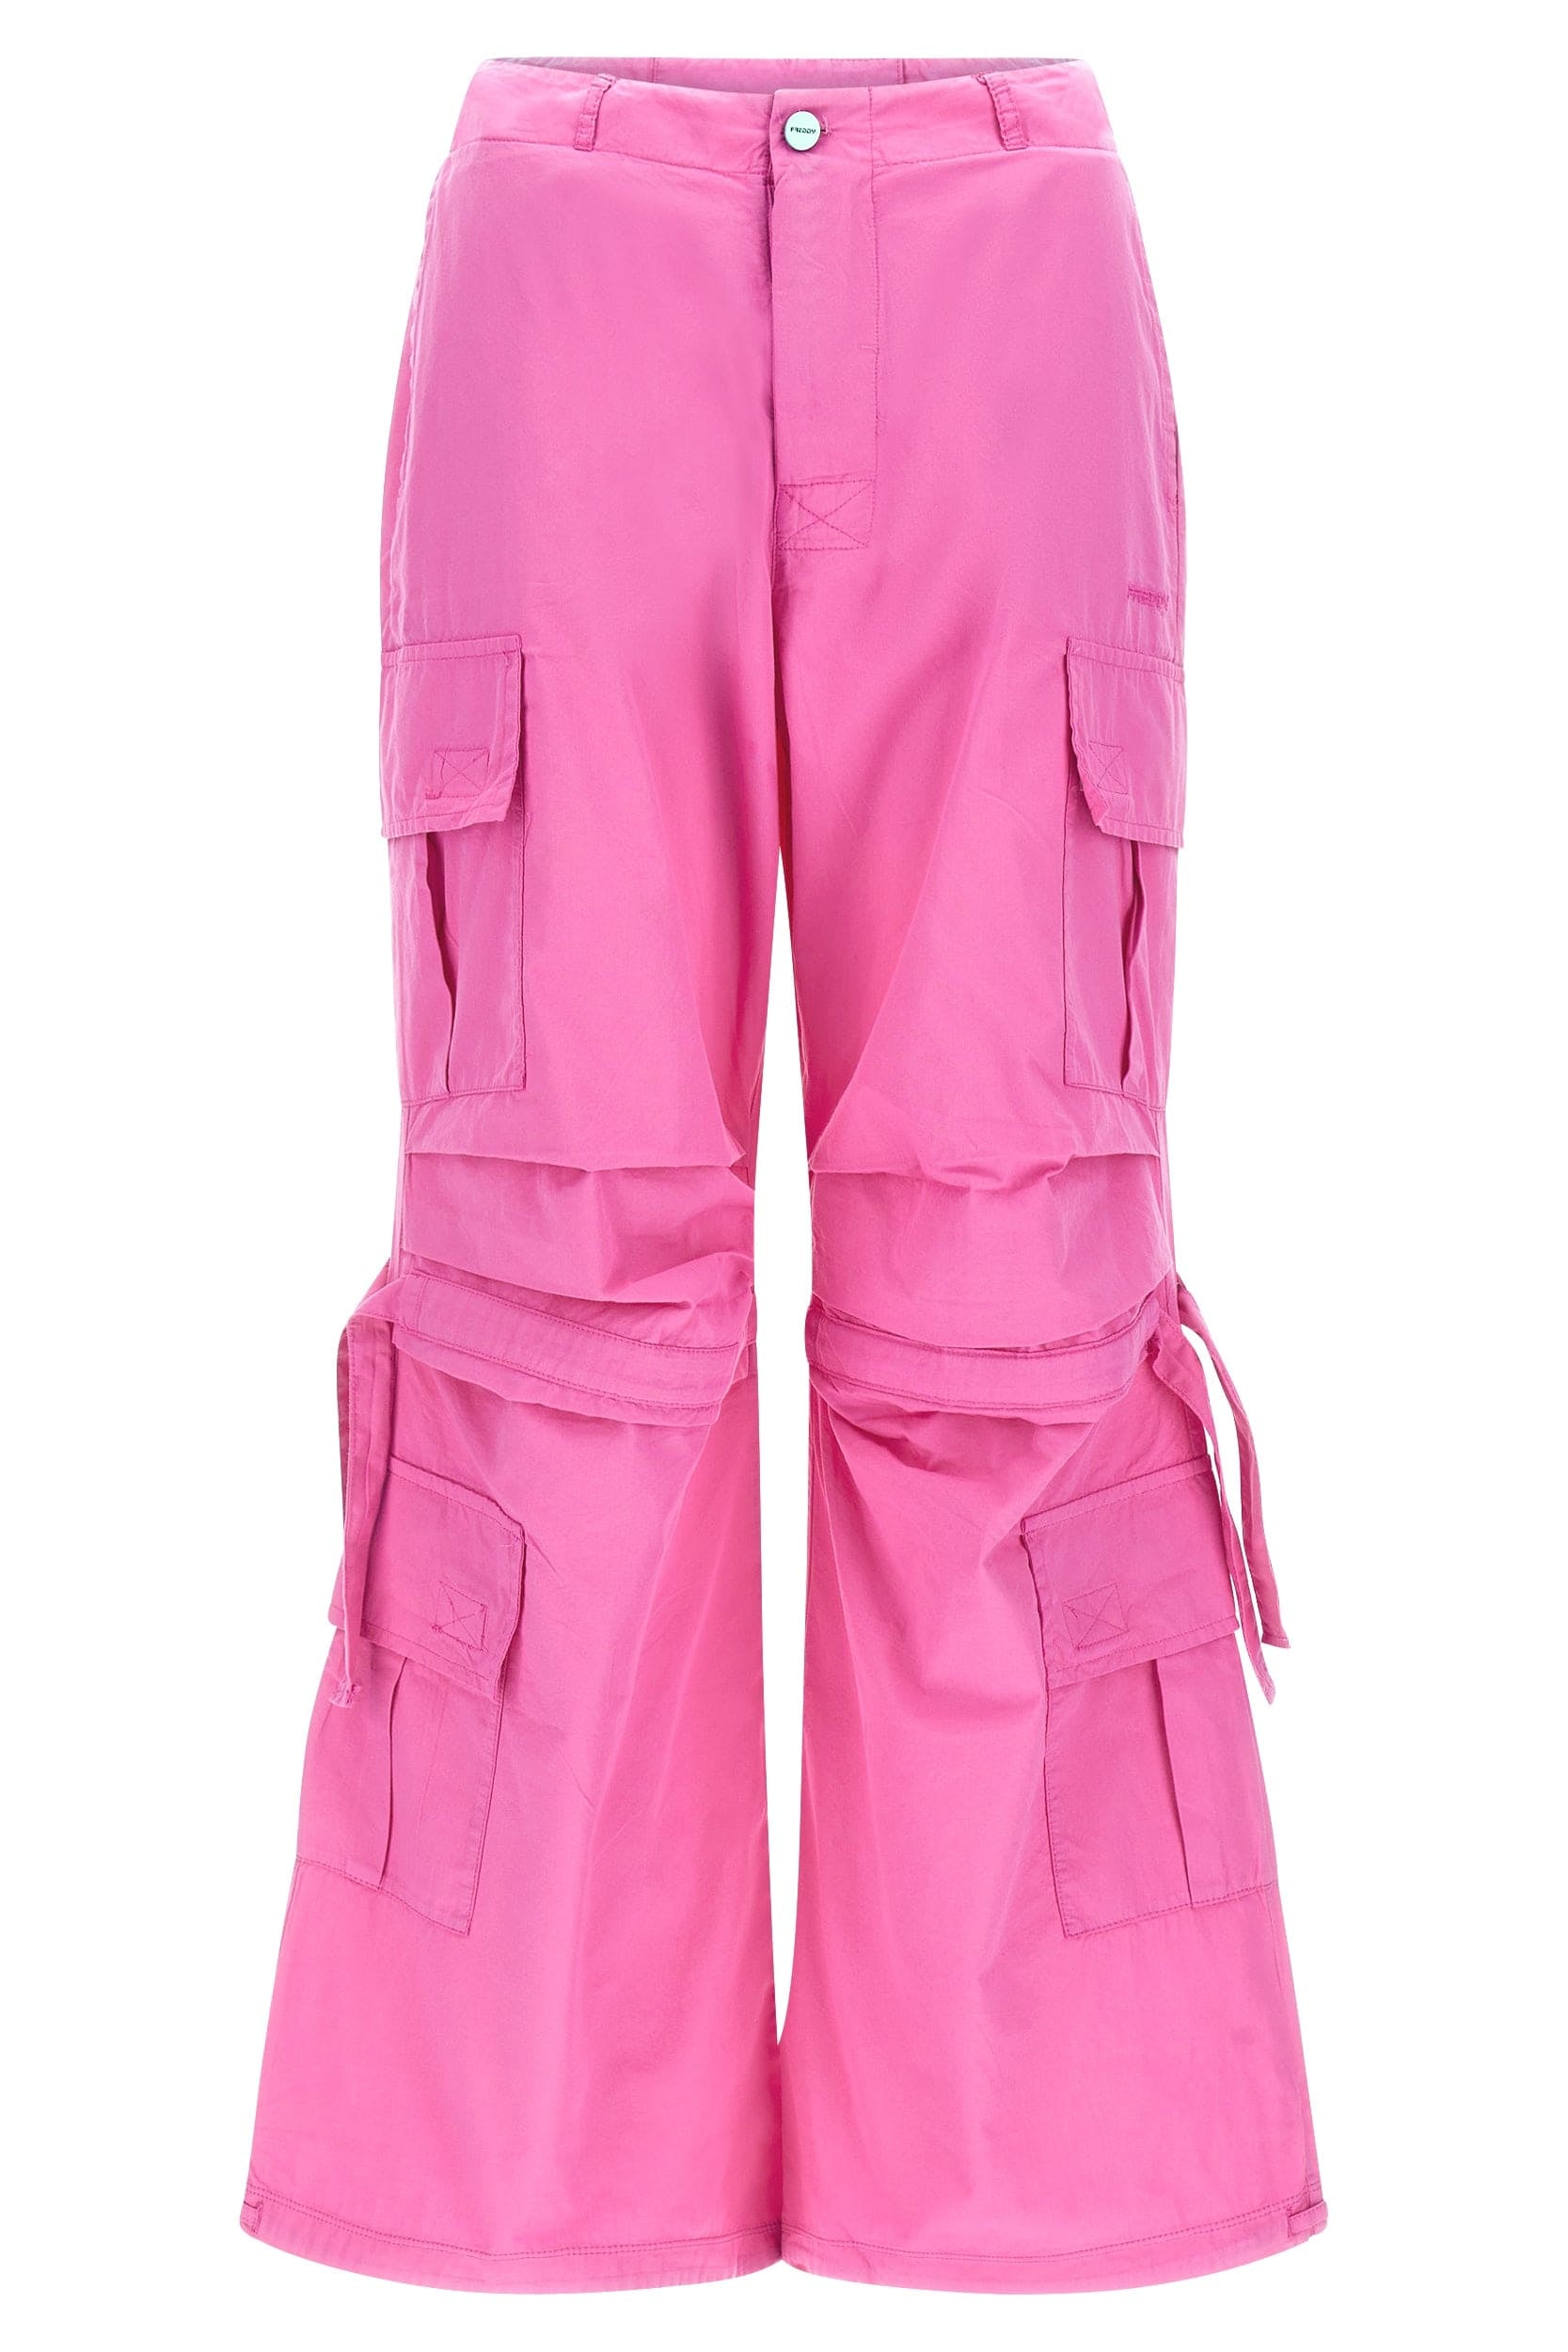 Cargo Trousers - High Waisted - Full Length - Pink 5